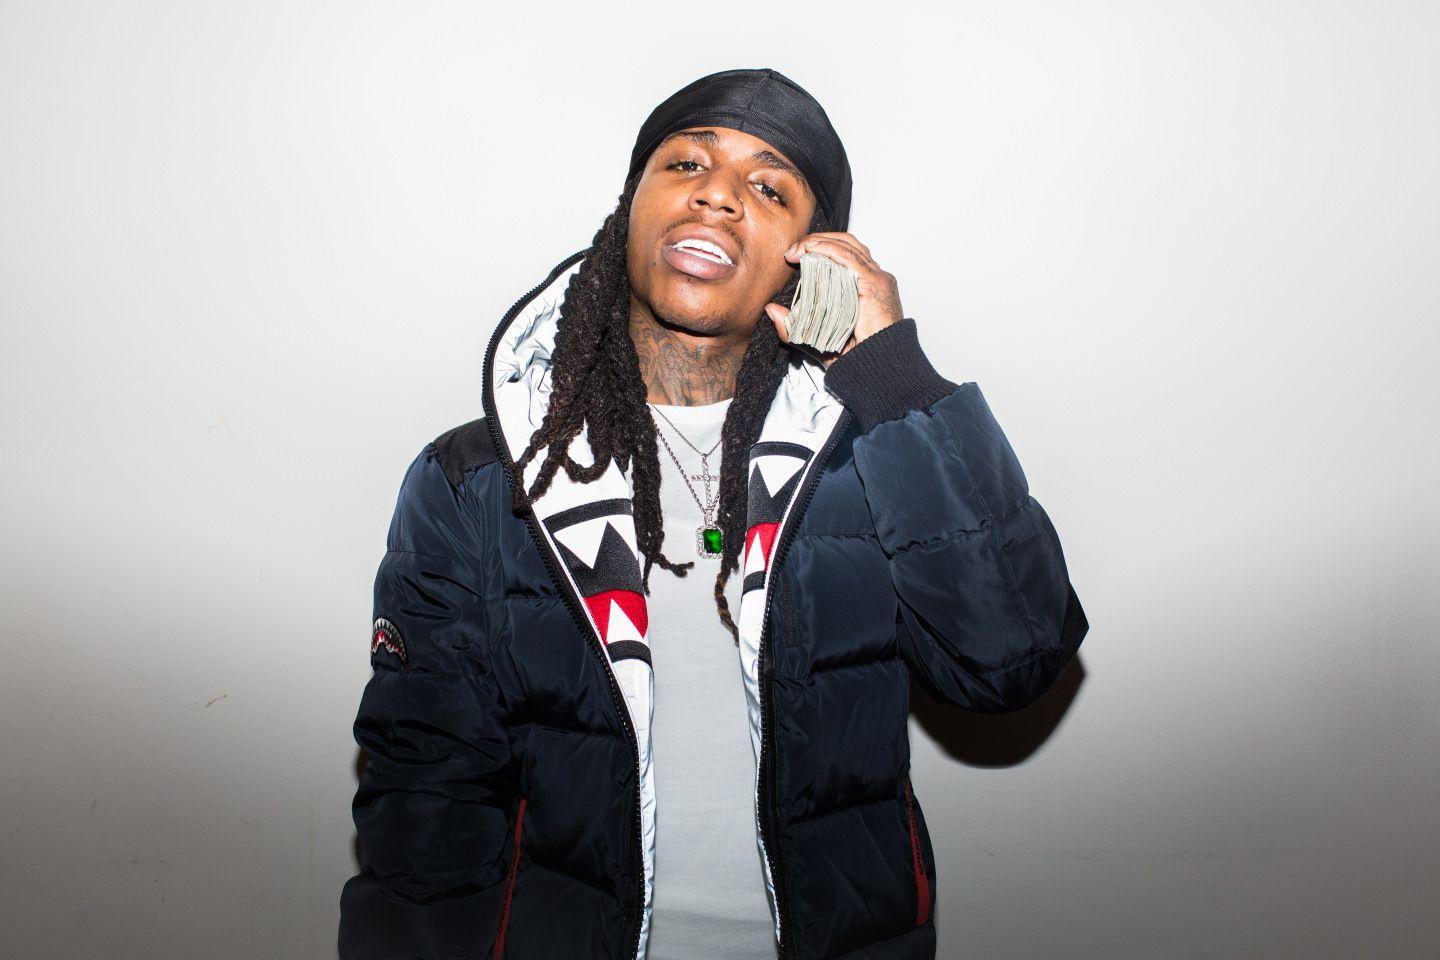 One of Cash Money Records newest signees, singer Jacquees brings.